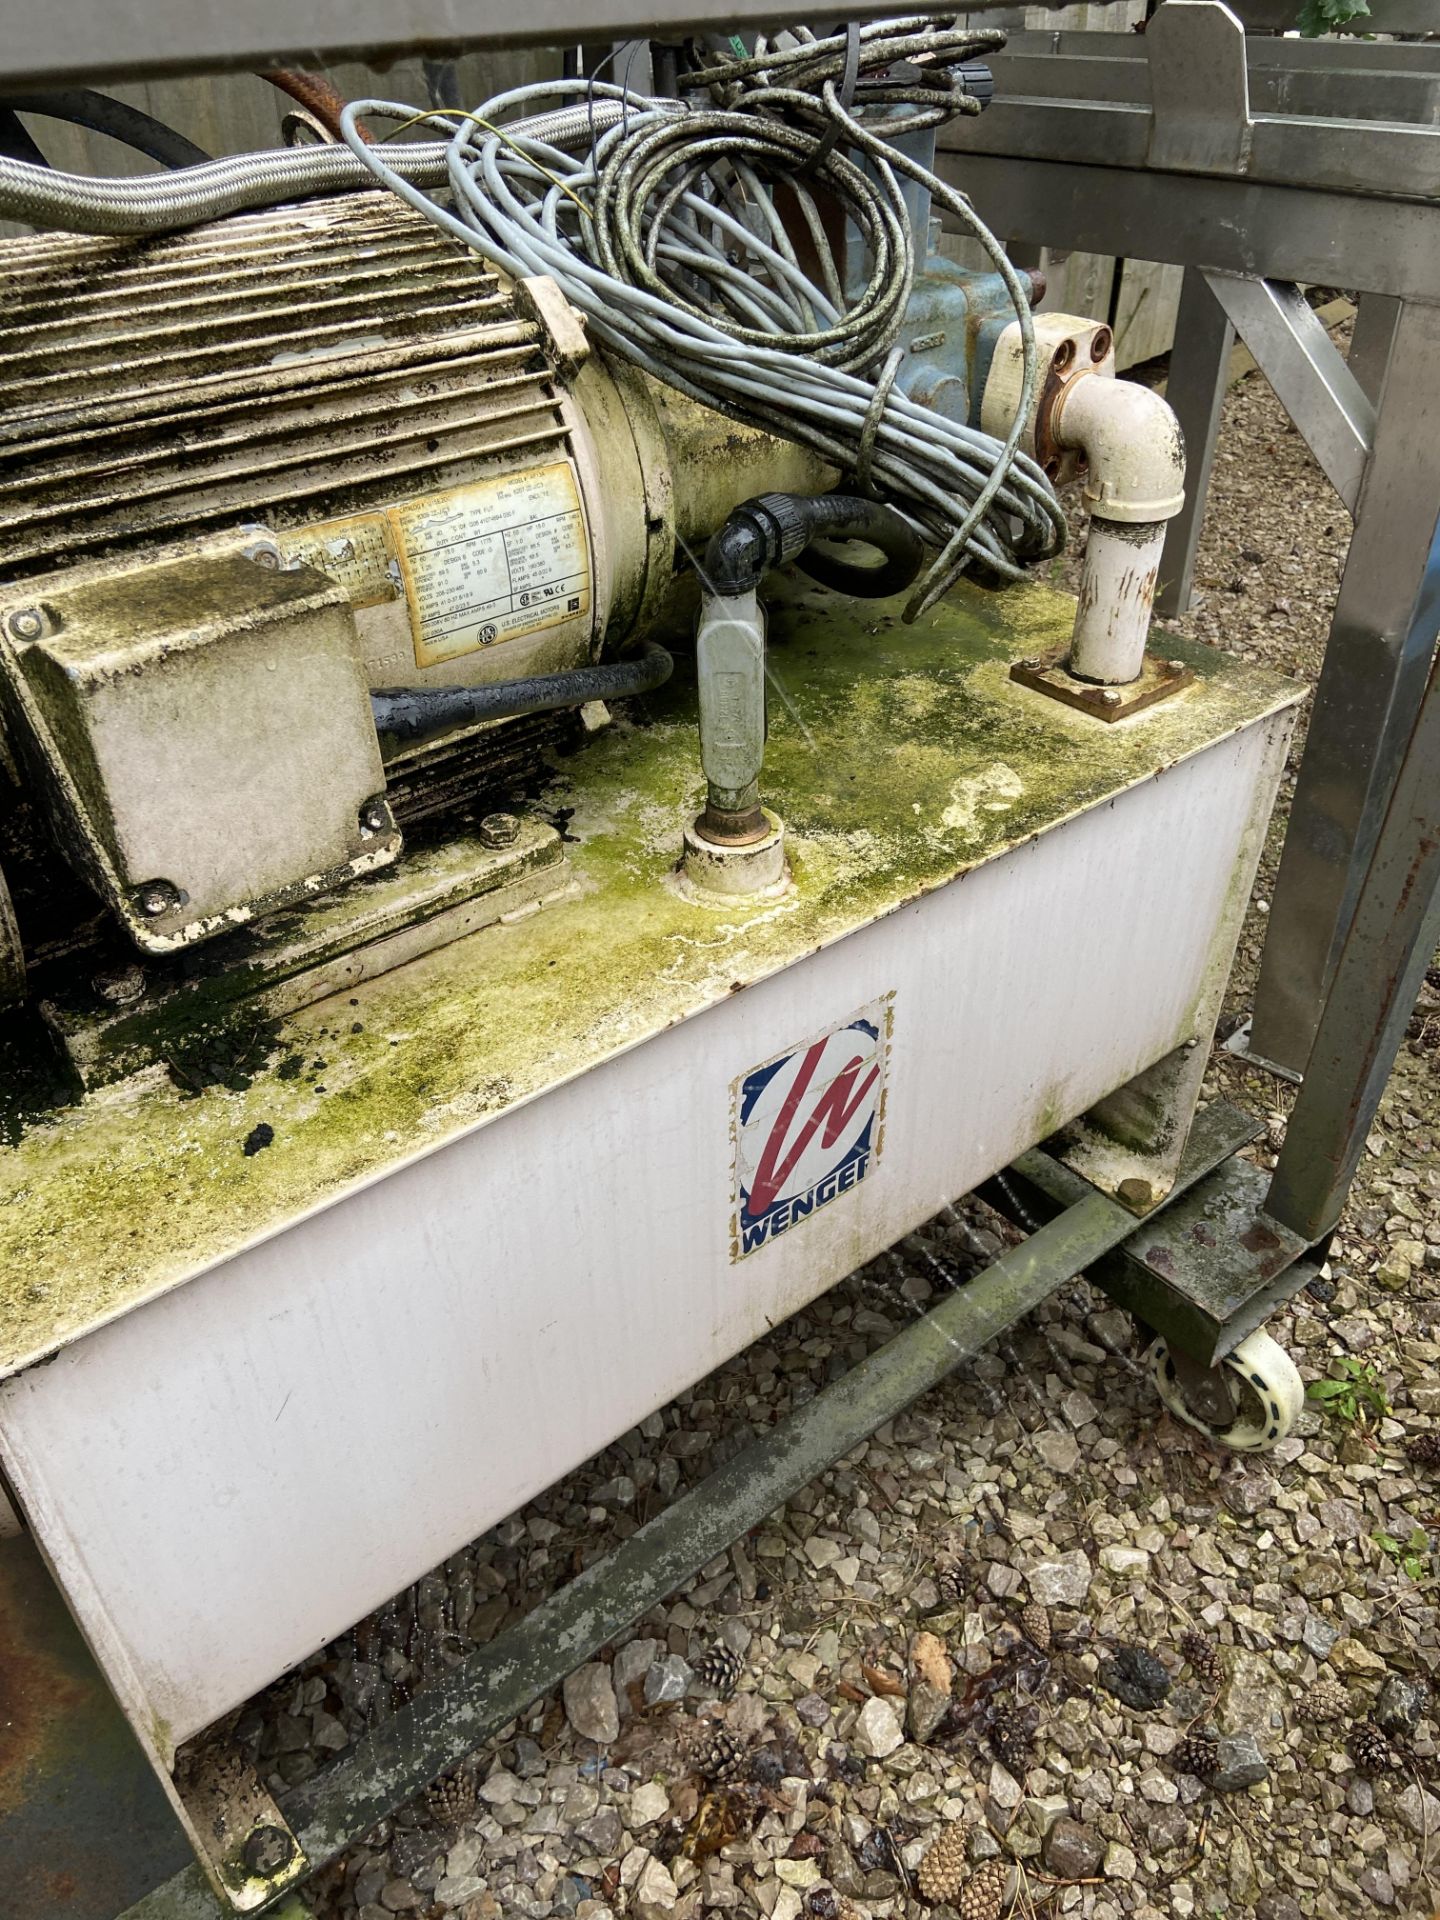 Wenger RM-2S Heat Exchanger, serial no. 253648, on mobile steel frame, with fitted control panel, - Image 2 of 4